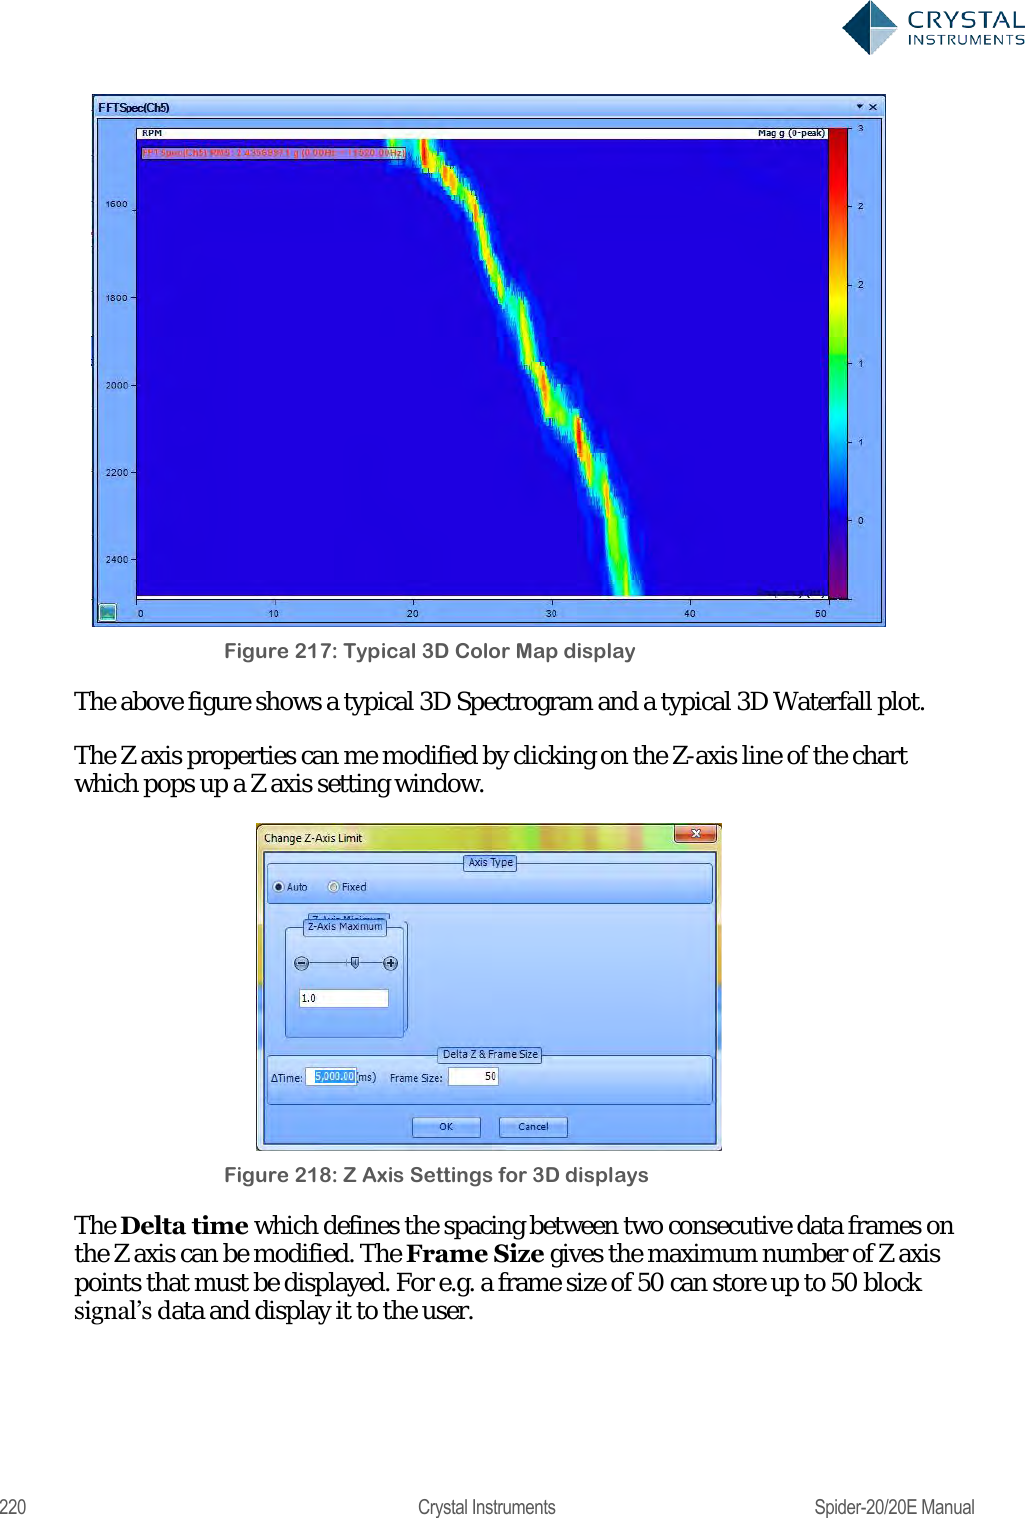  220  Crystal Instruments  Spider-20/20E Manual  Figure 217: Typical 3D Color Map display The above figure shows a typical 3D Spectrogram and a typical 3D Waterfall plot. The Z axis properties can me modified by clicking on the Z-axis line of the chart which pops up a Z axis setting window.  Figure 218: Z Axis Settings for 3D displays The Delta time which defines the spacing between two consecutive data frames on the Z axis can be modified. The Frame Size gives the maximum number of Z axis points that must be displayed. For e.g. a frame size of 50 can store up to 50 block signal‘s data and display it to the user.    